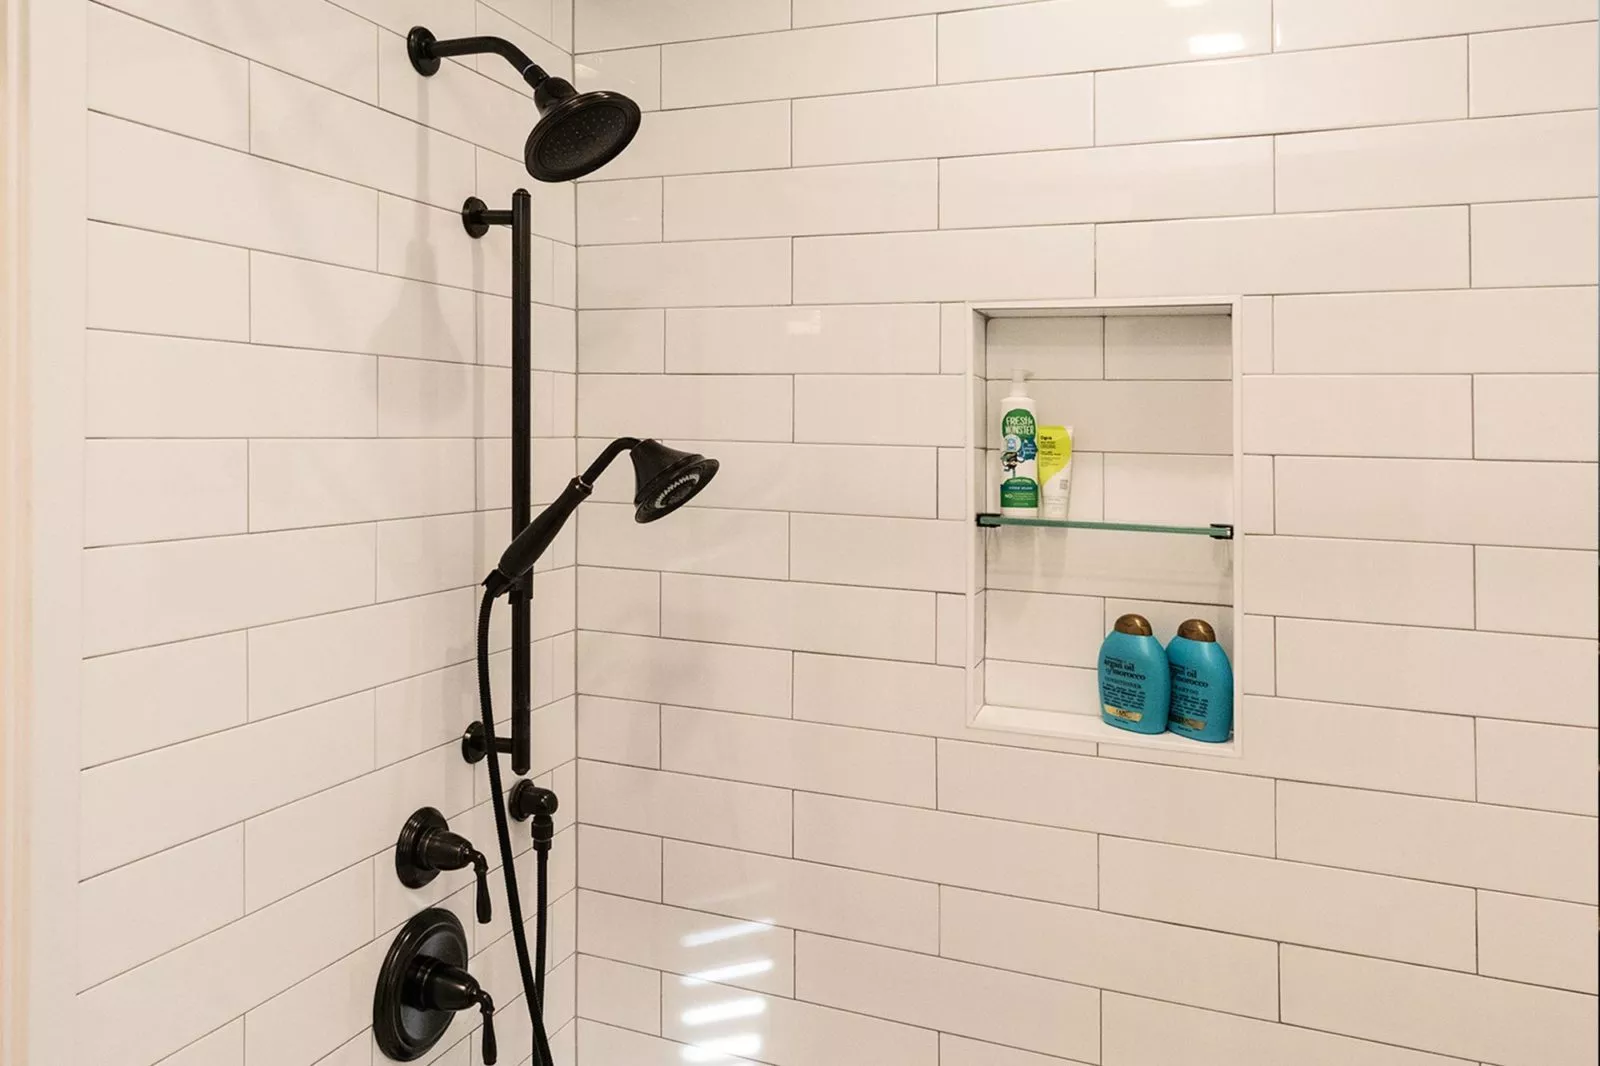 Inside of a shower with white tile walls, black shower head & handles, and products on shelf